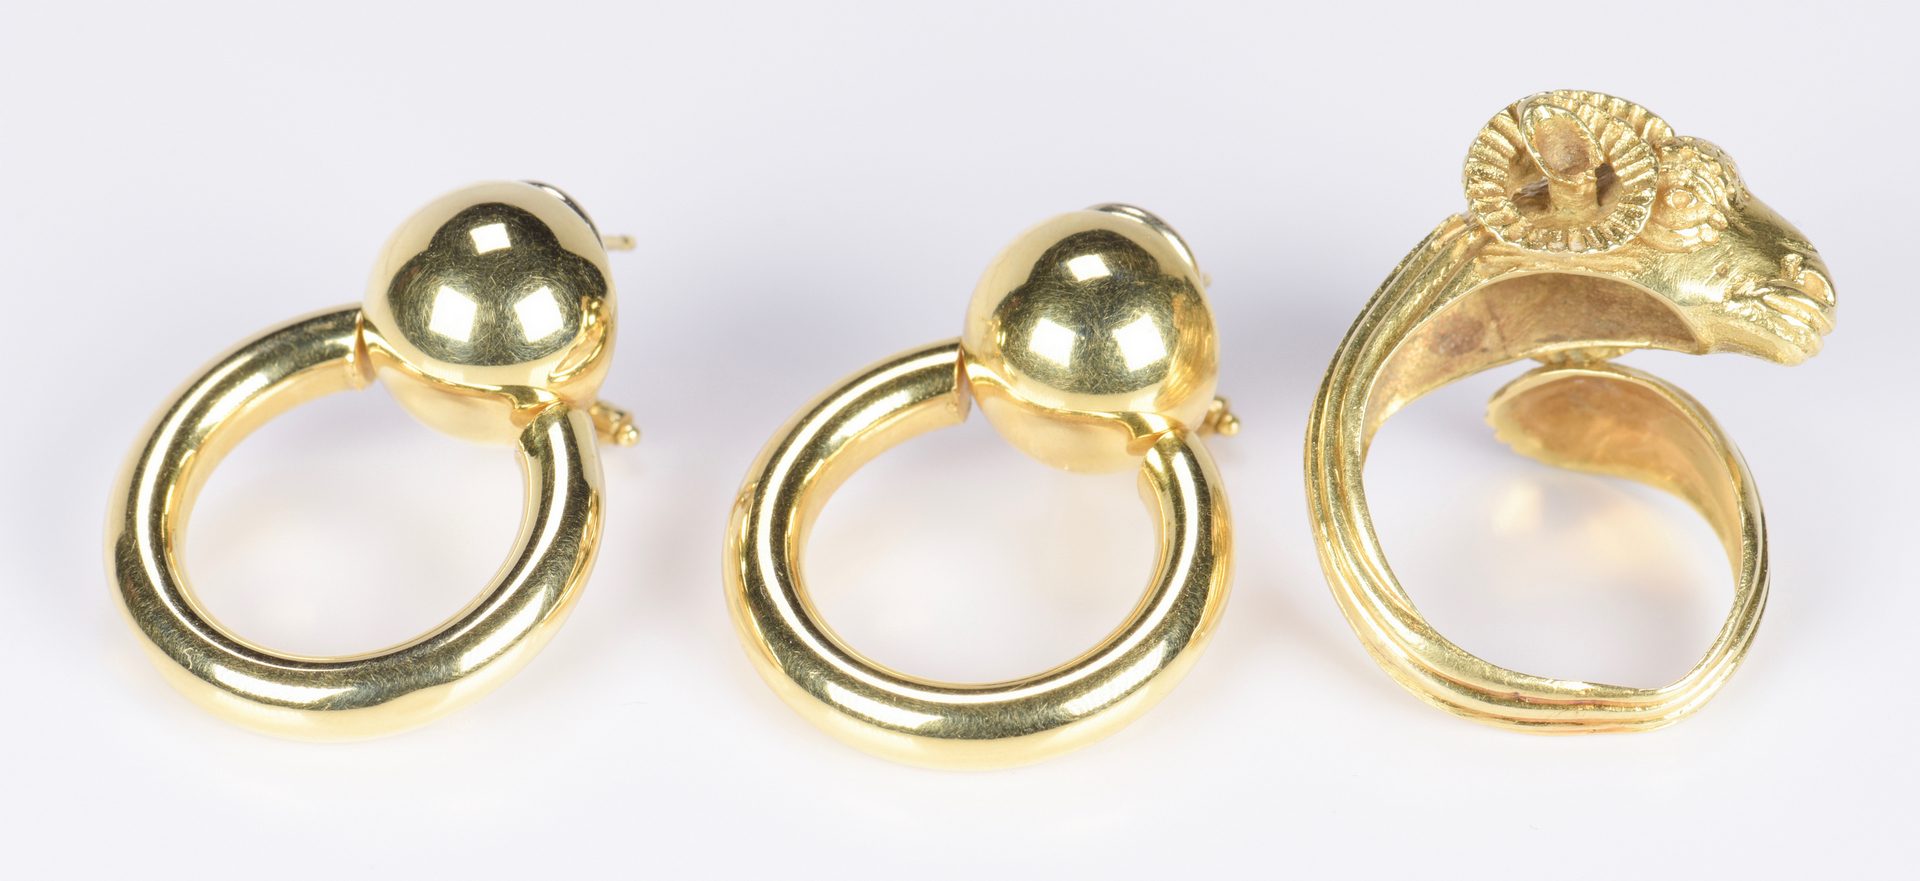 Lot 792: 4 Items of 18K Gold Jewelry, Incl Ram’s Head Ring